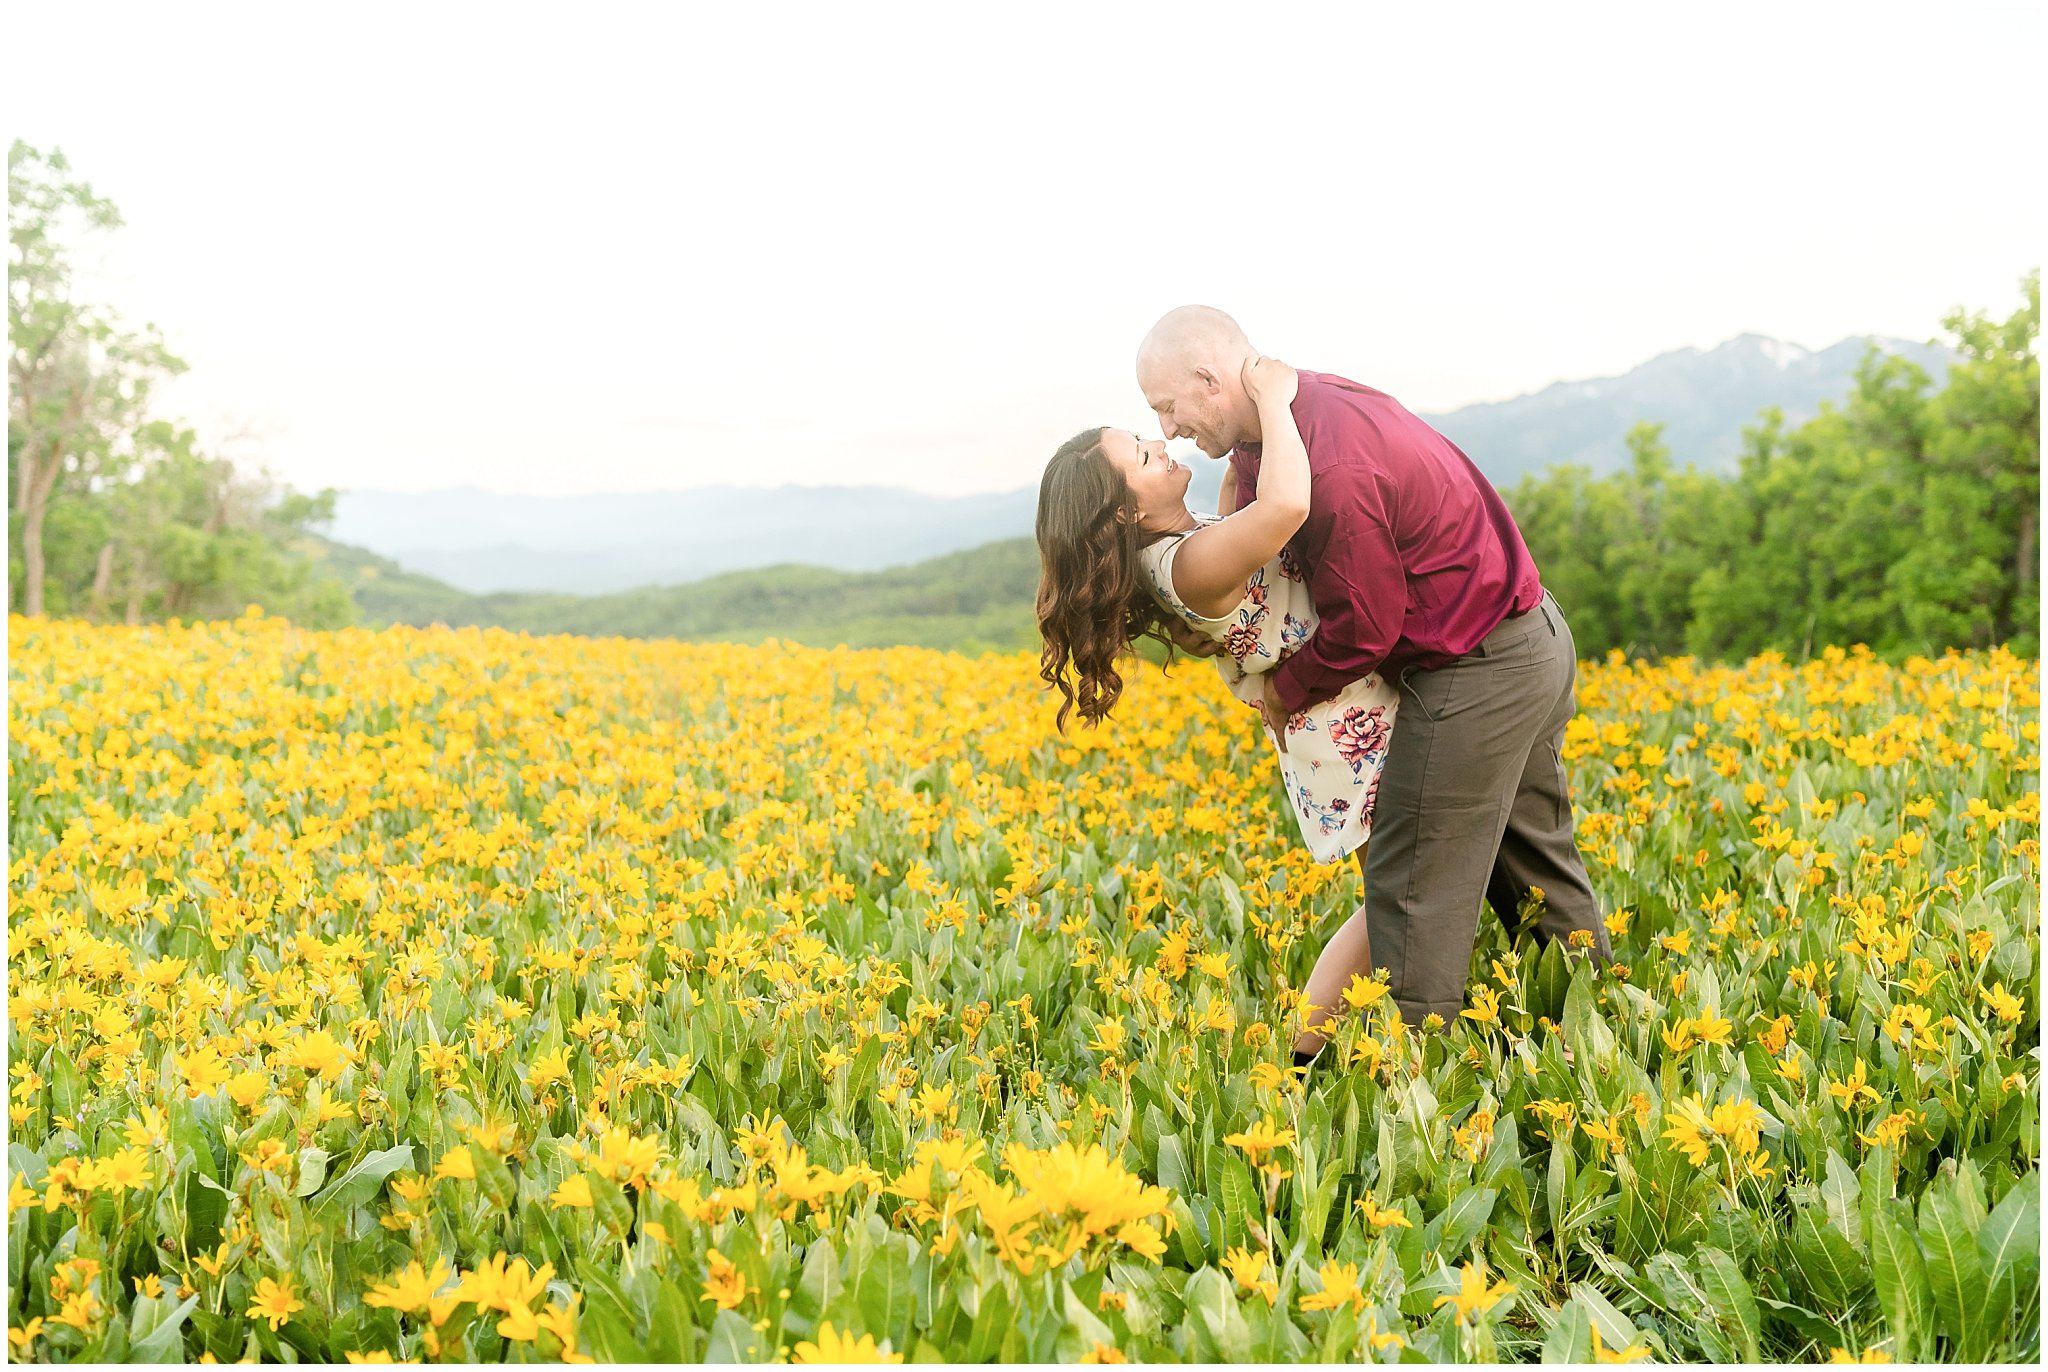 Couple's romantic engagement session in the mountains with wildflowers | Snowbasin Utah Engagements